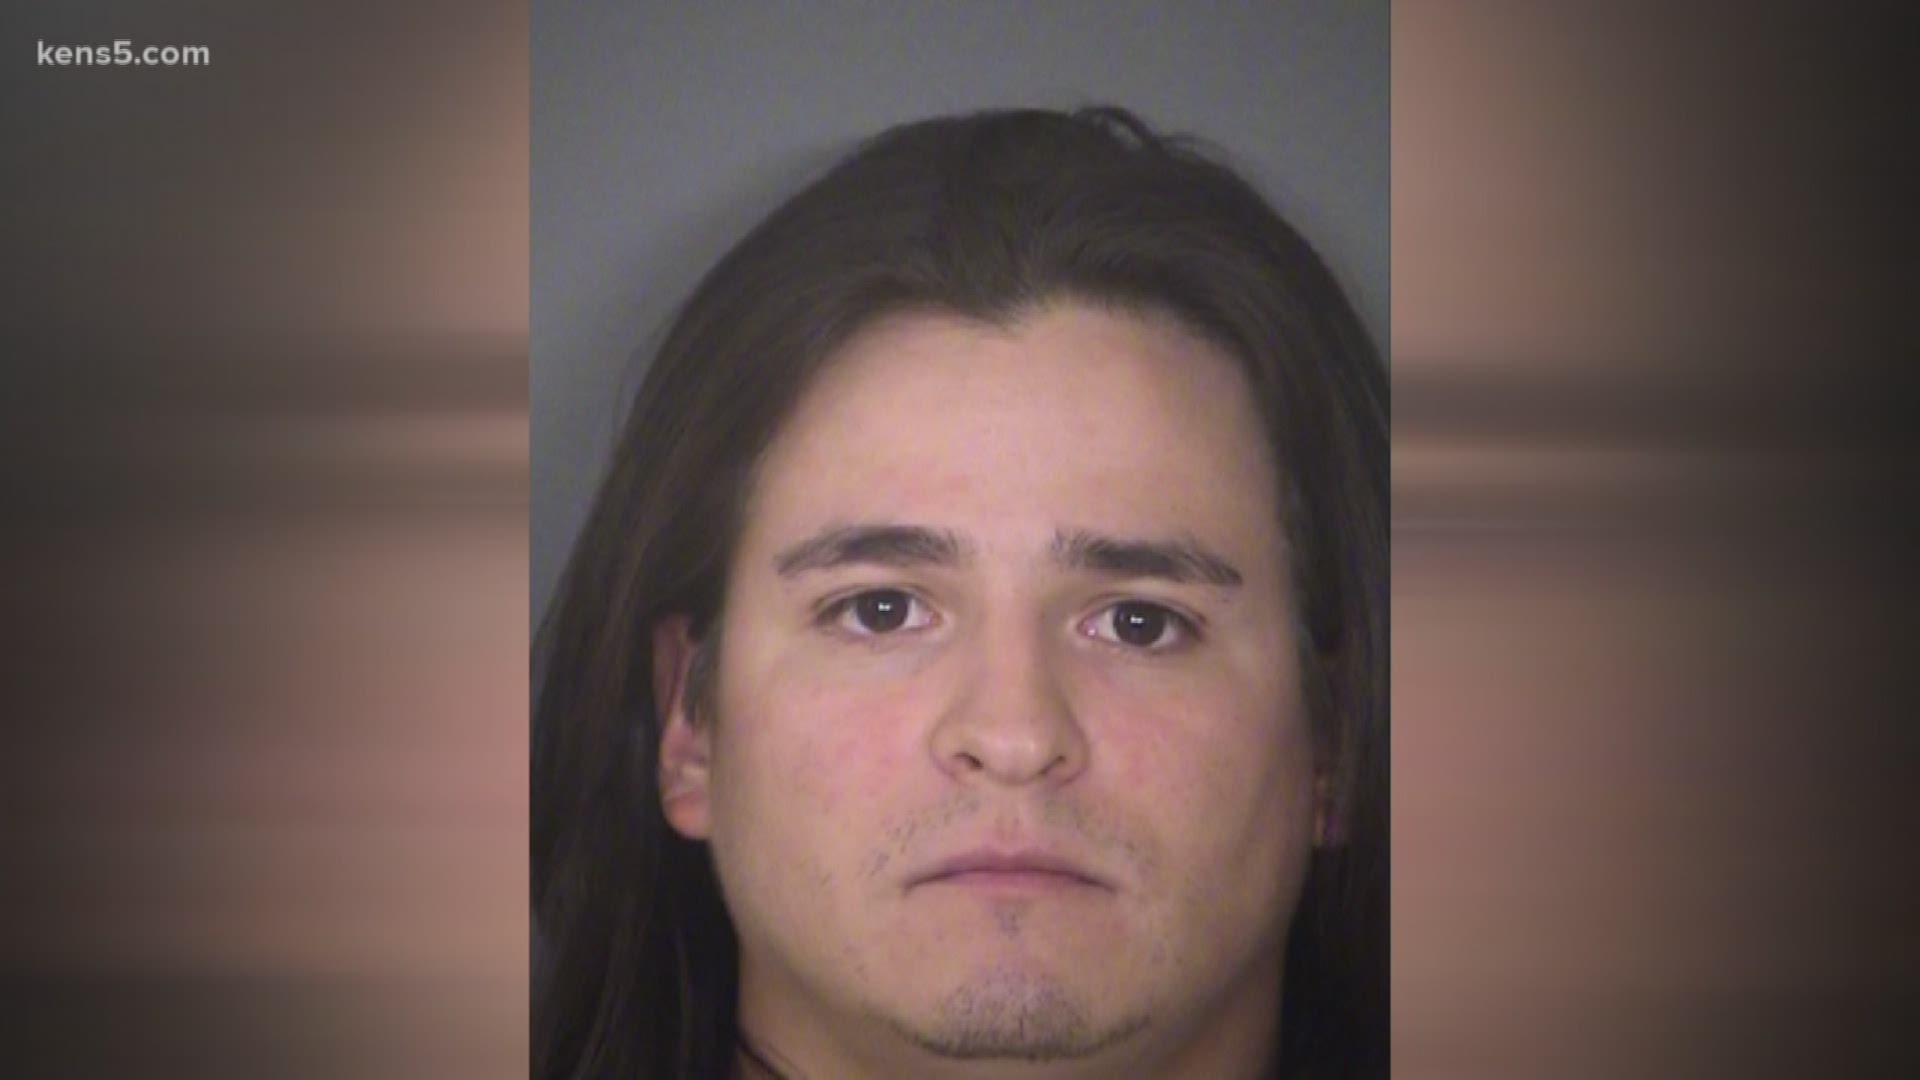 San Antonio police arrested a man accused of posing as a maintenance worker before sexually assaulting a woman at her apartment back in July.